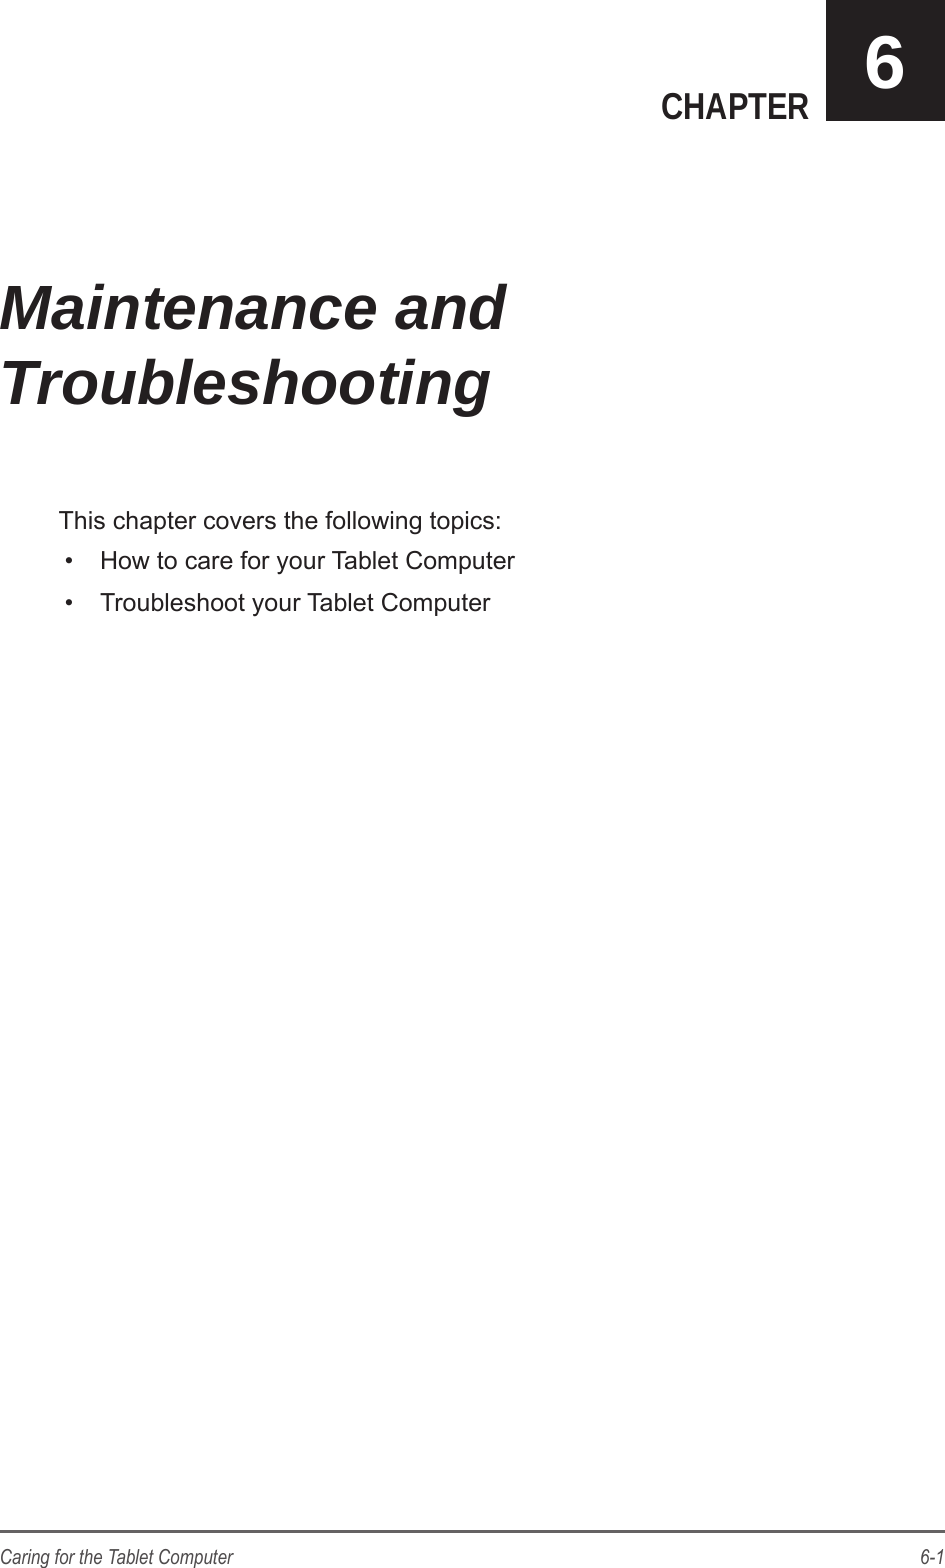 6-1Caring for the Tablet ComputerCHAPTER 6This chapter covers the following topics:•  How to care for your Tablet Computer•  Troubleshoot your Tablet ComputerMaintenance and  Troubleshooting